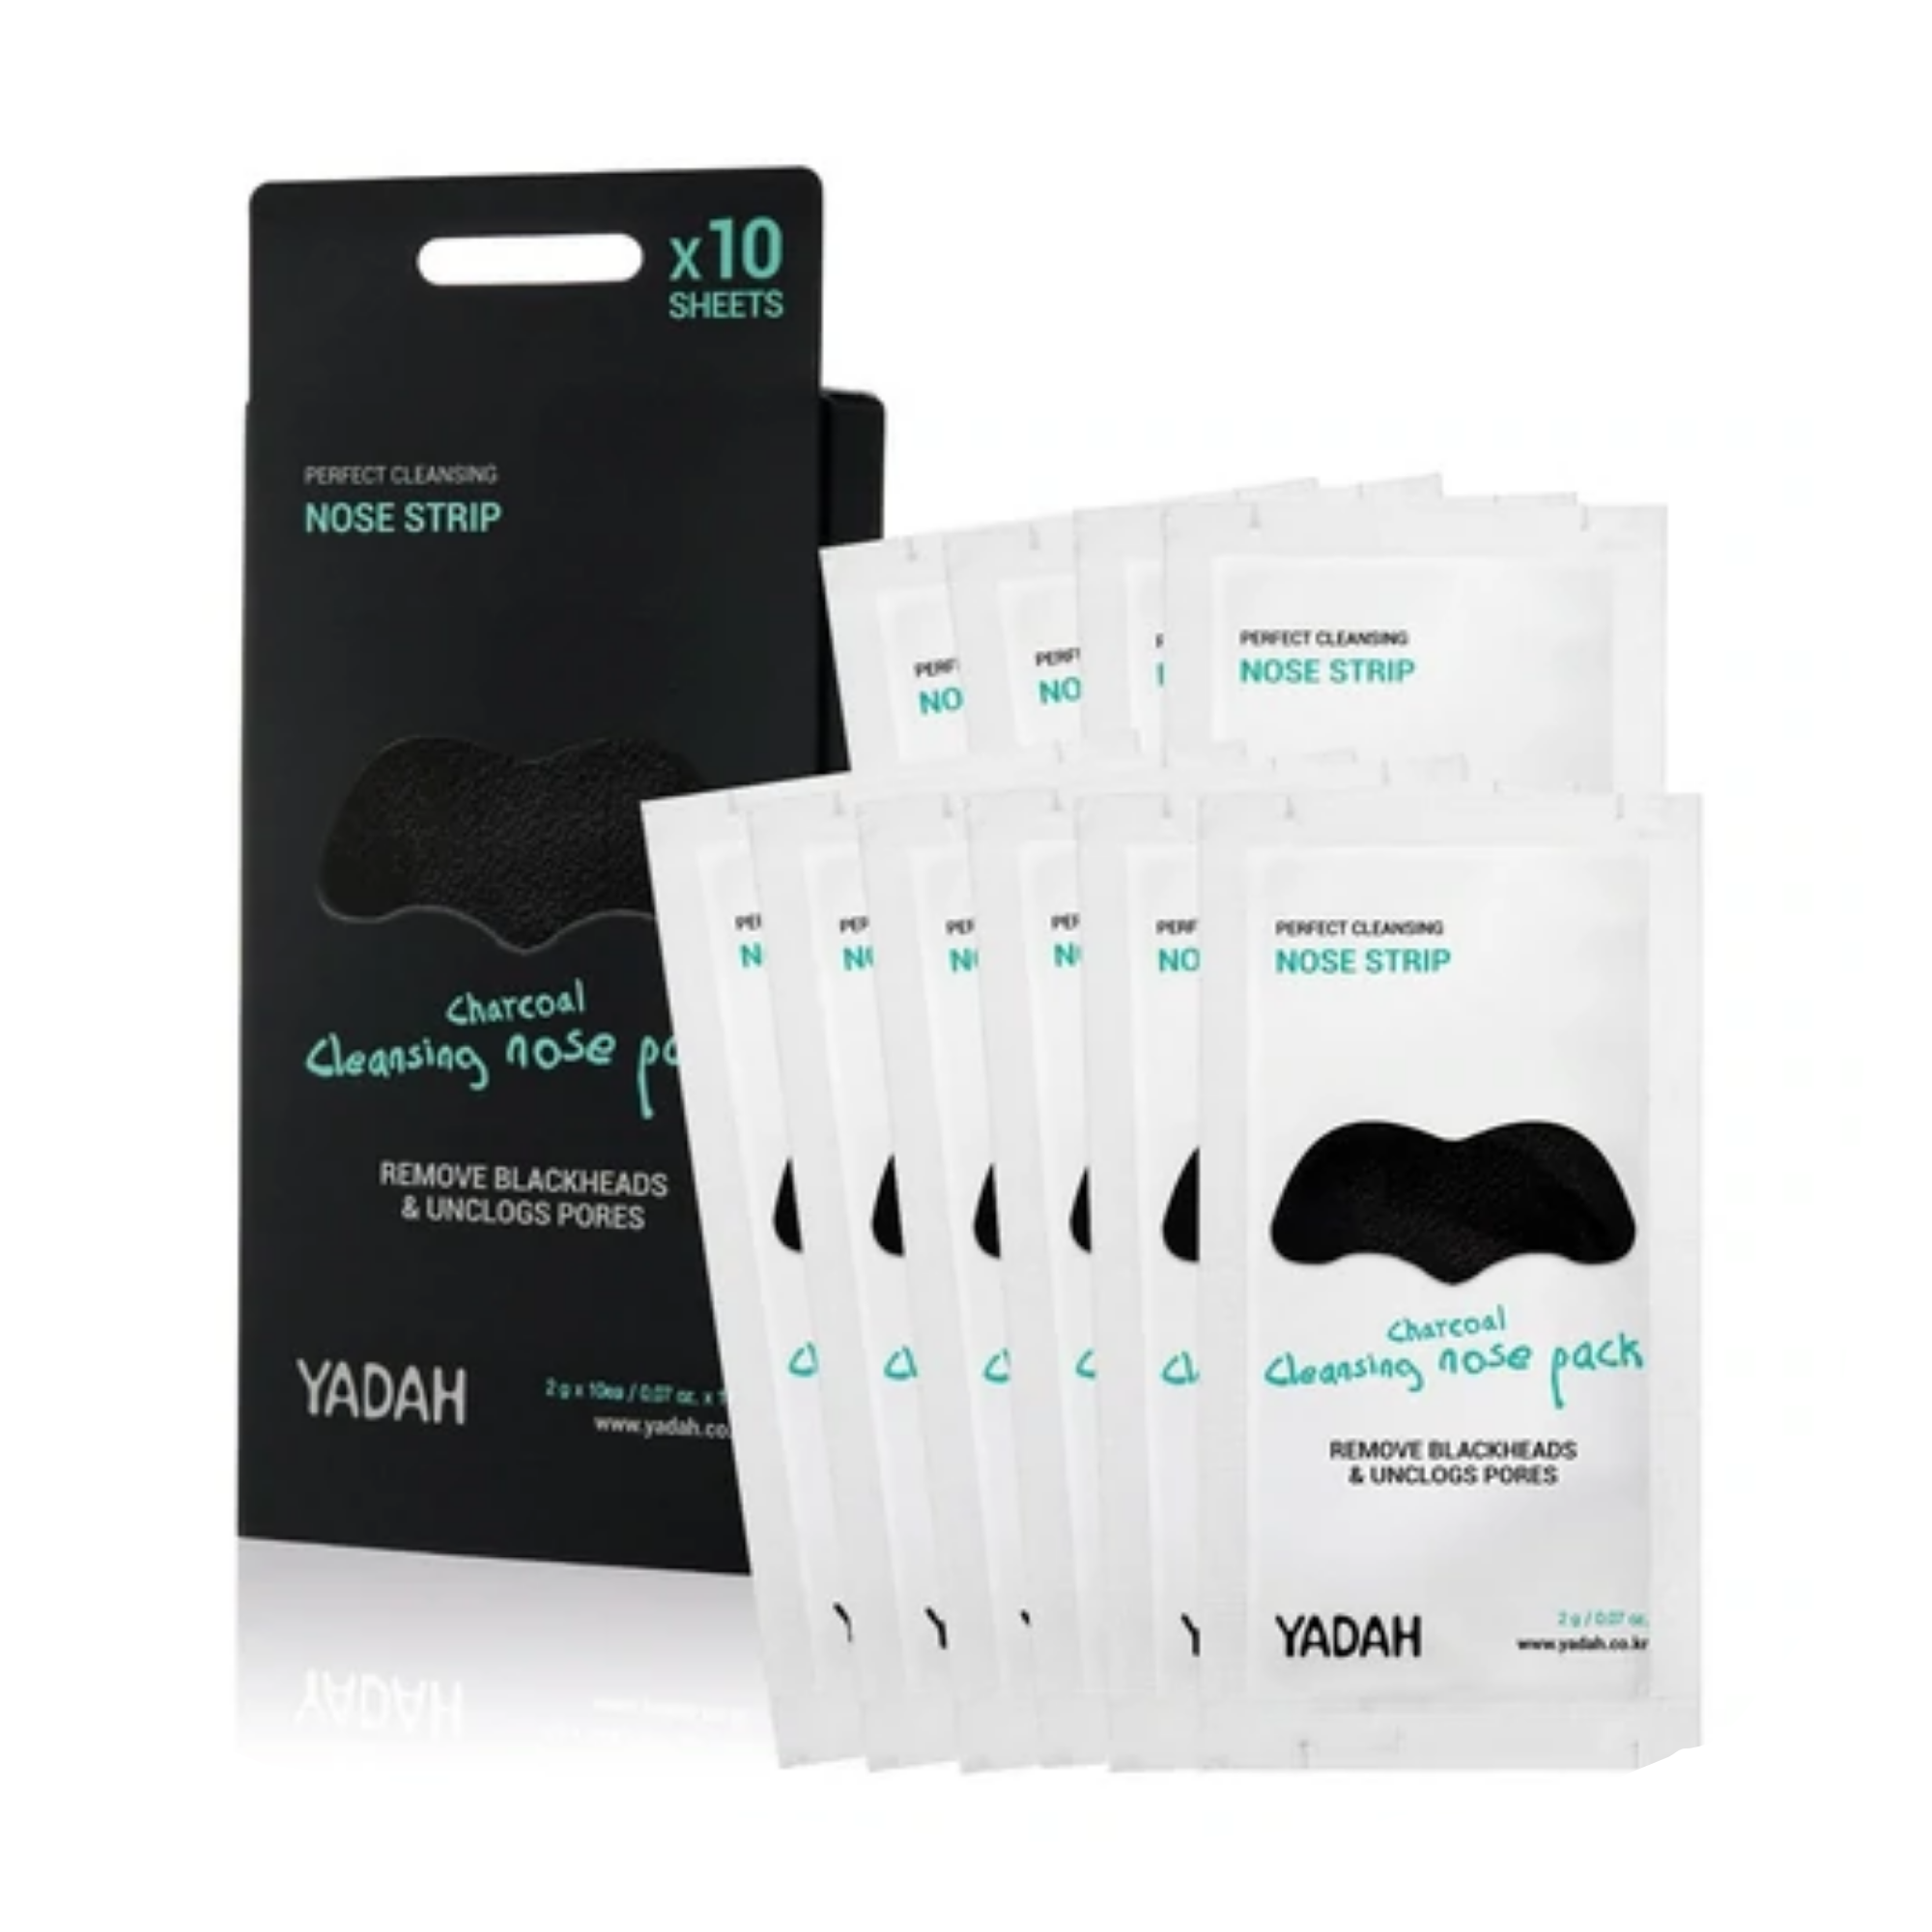 YADAH CHARCOAL CLEANSING NOSE PACK